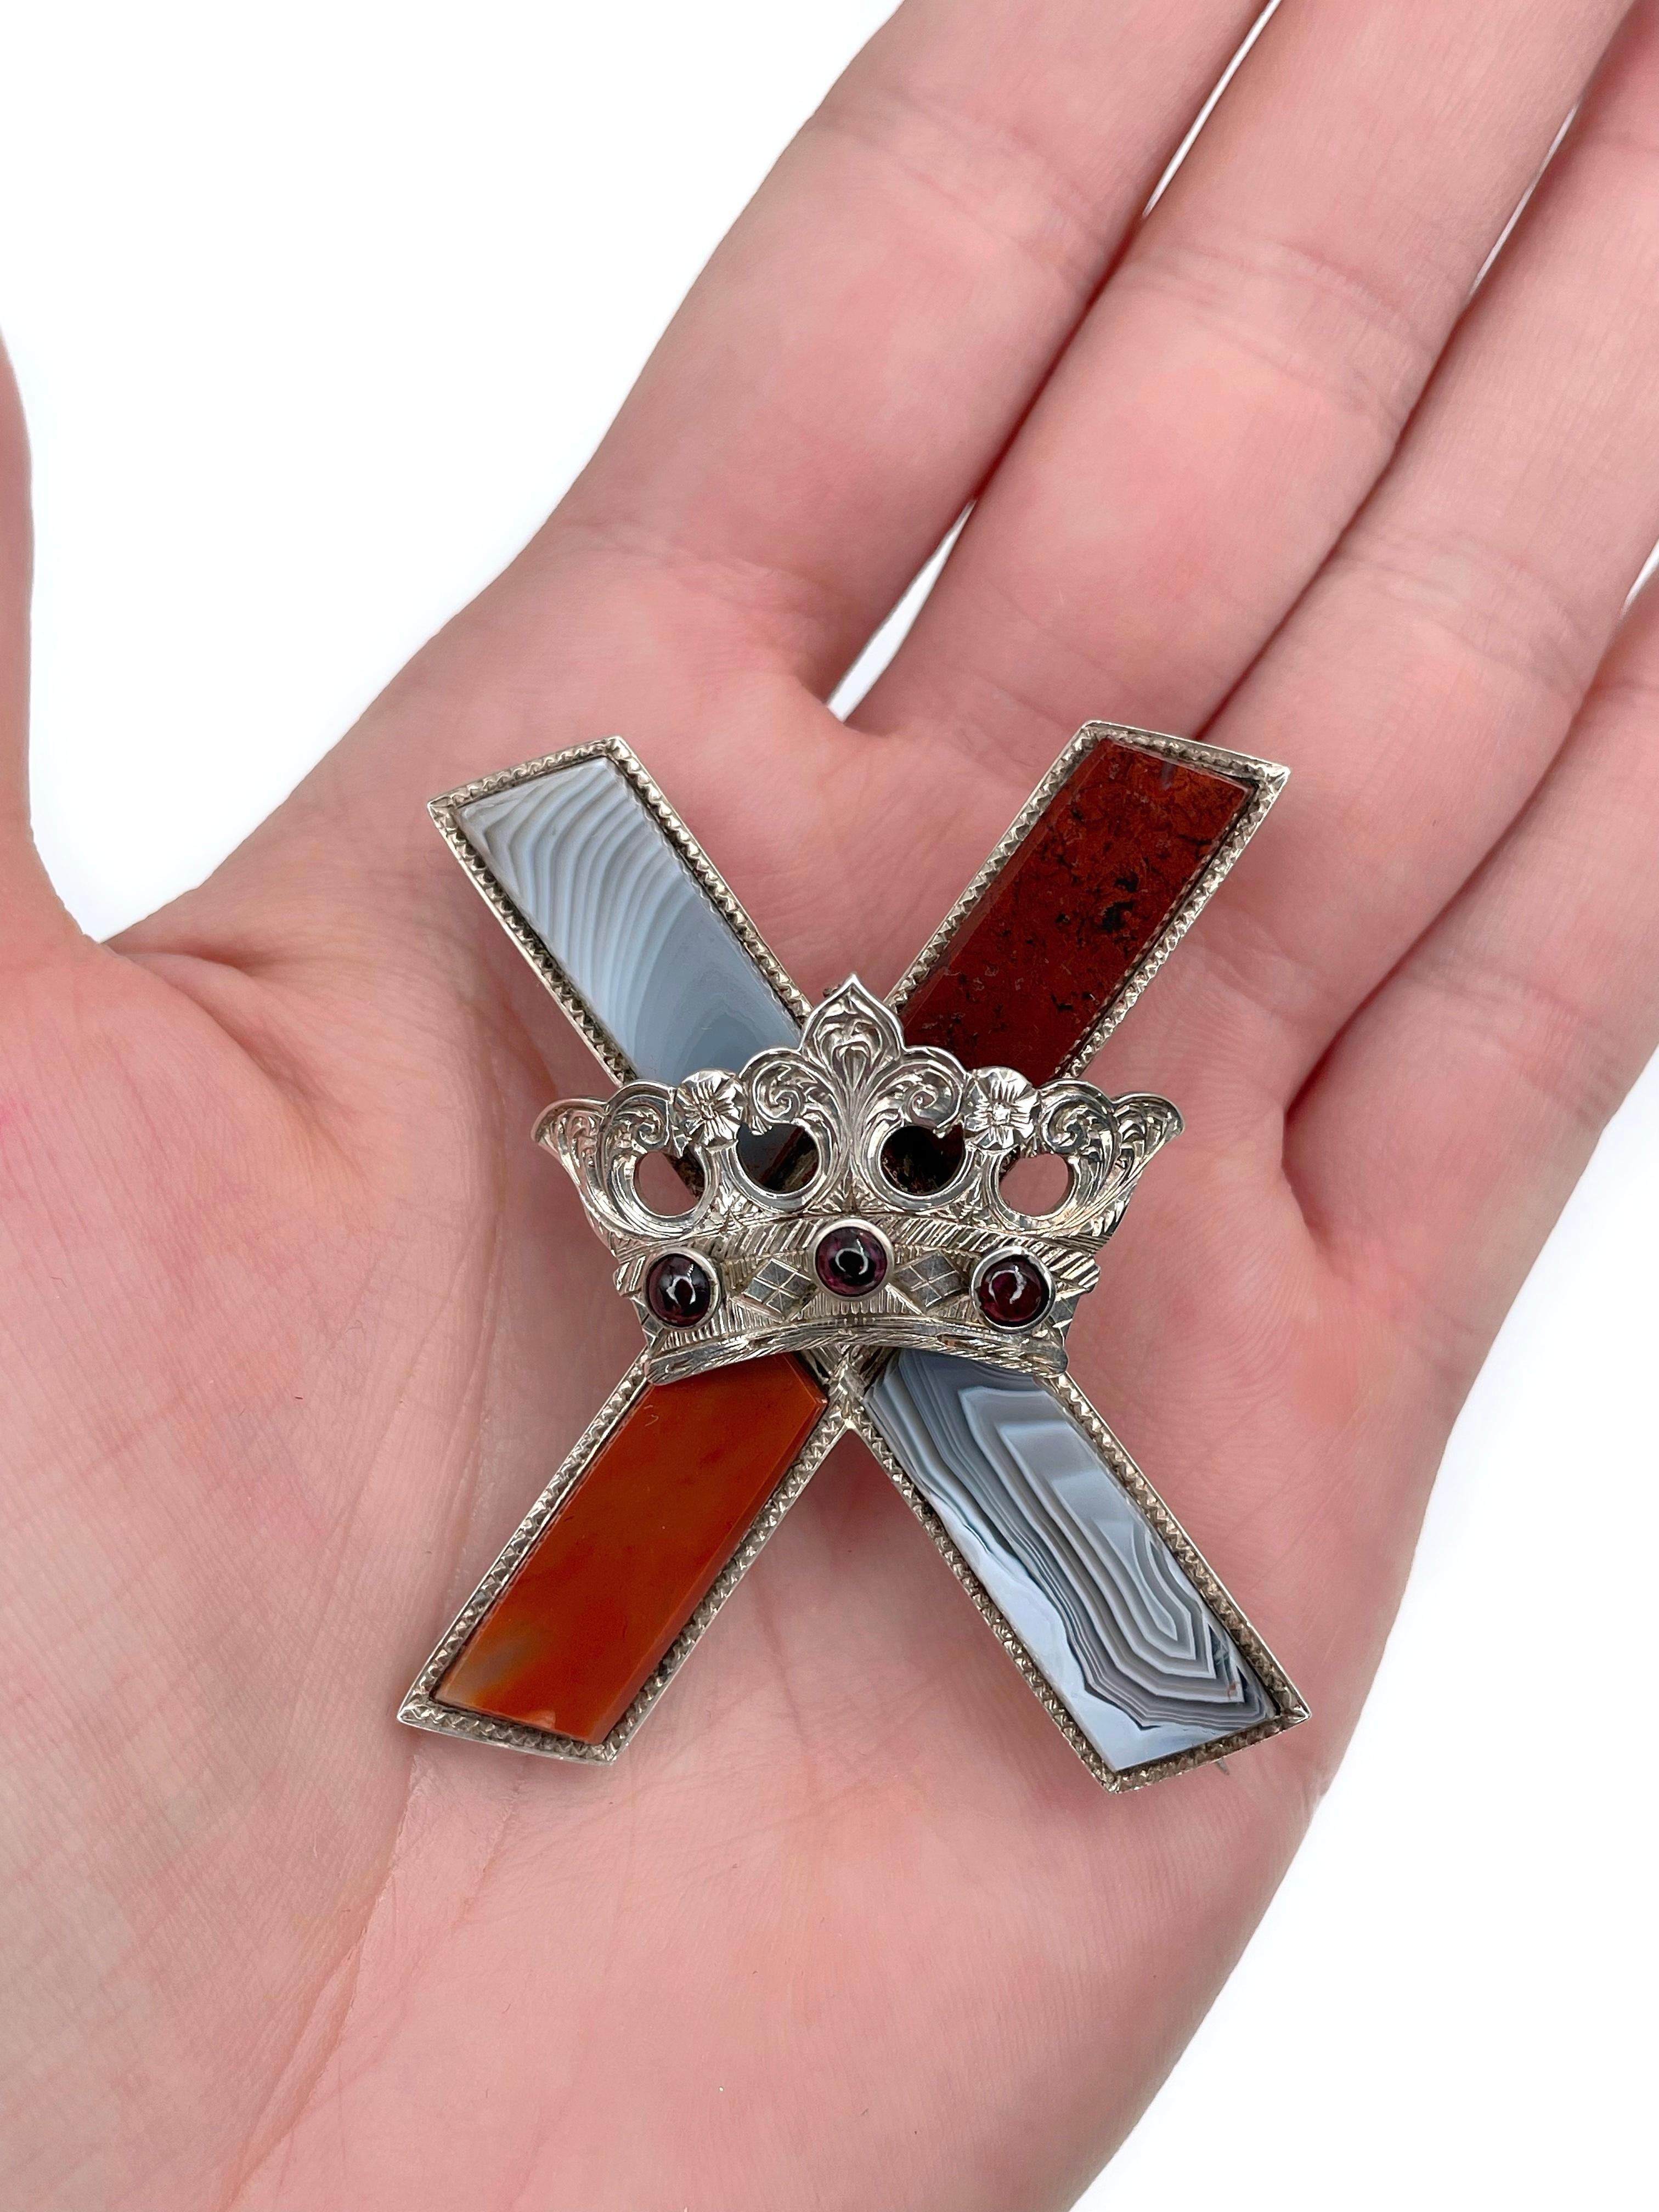 This is a Victorian era Saltire cross and crown pin brooch crafted in silver. Circa 1880. 

It features Scottish agates and garnets.  

Saltire, also called St. Andrew’s, cross is a heraldic symbol in the form of a diagonal cross. In the 16th